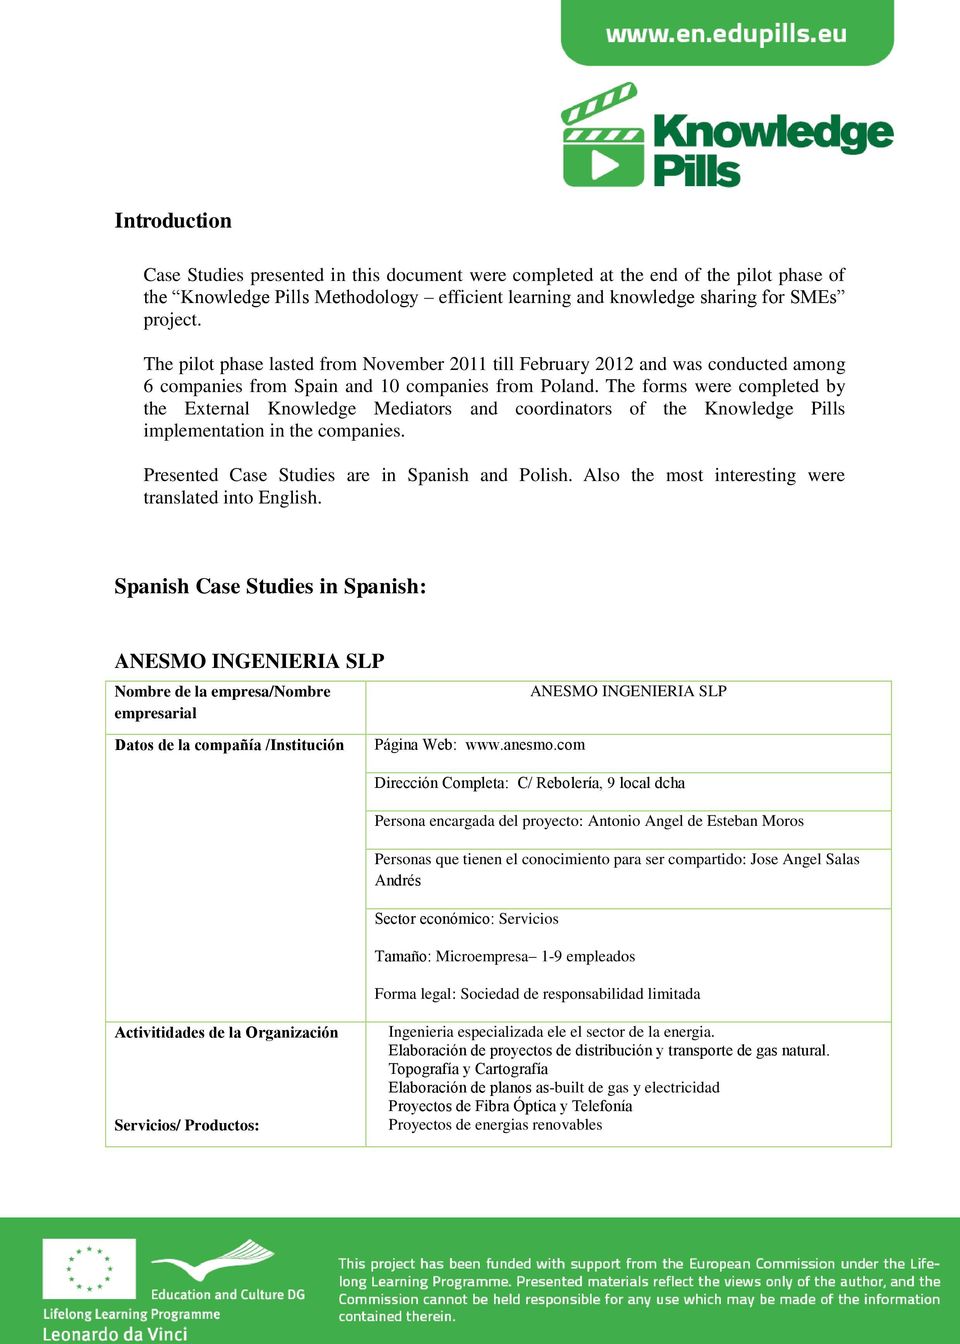 The forms were completed by the External Knowledge Mediators and coordinators of the Knowledge Pills implementation in the companies. Presented Case Studies are in Spanish and Polish.